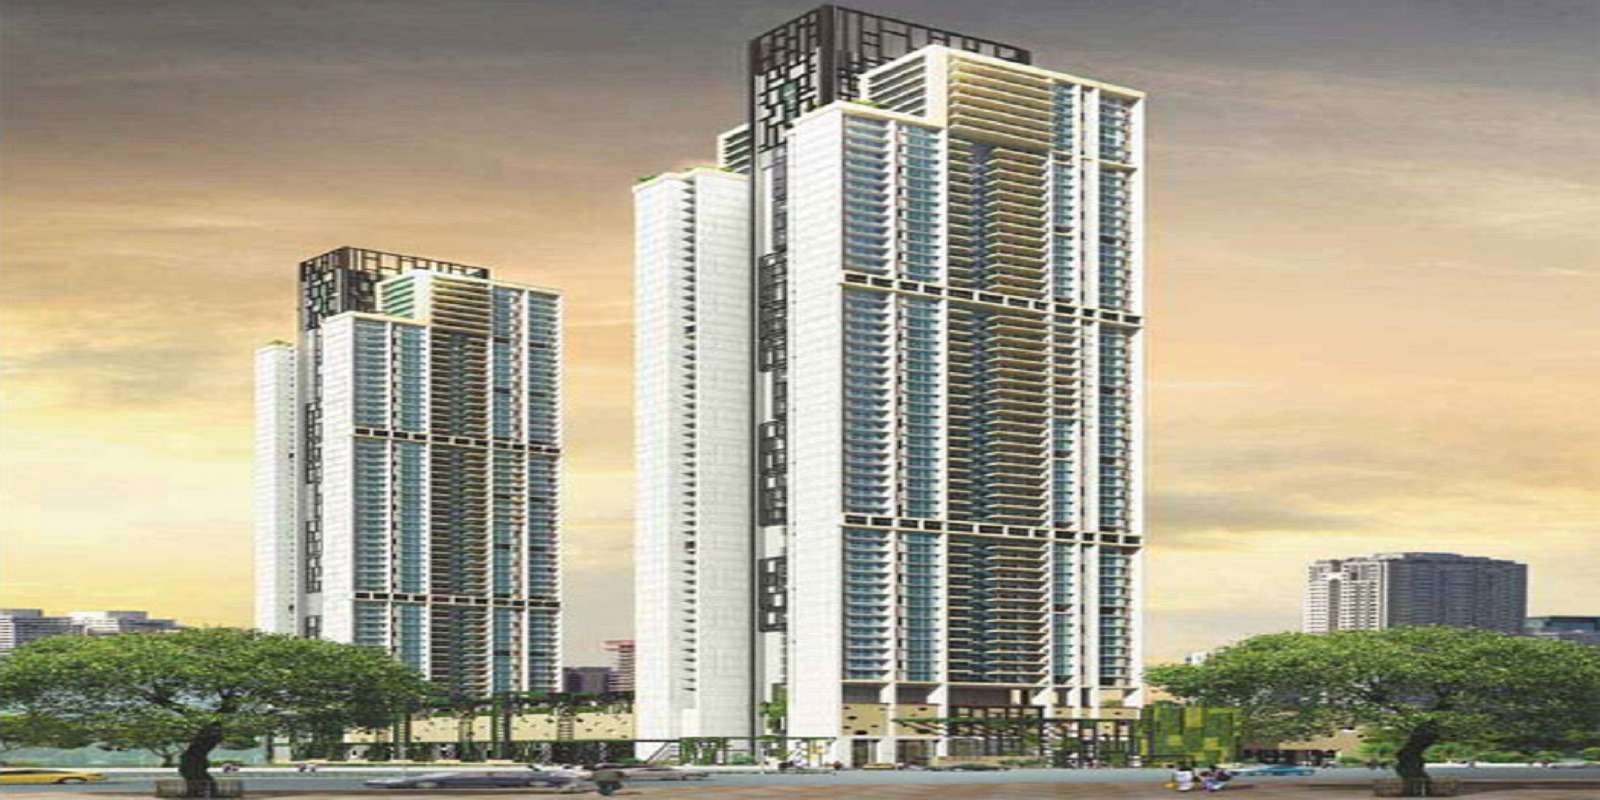 One of the tallest residential projects